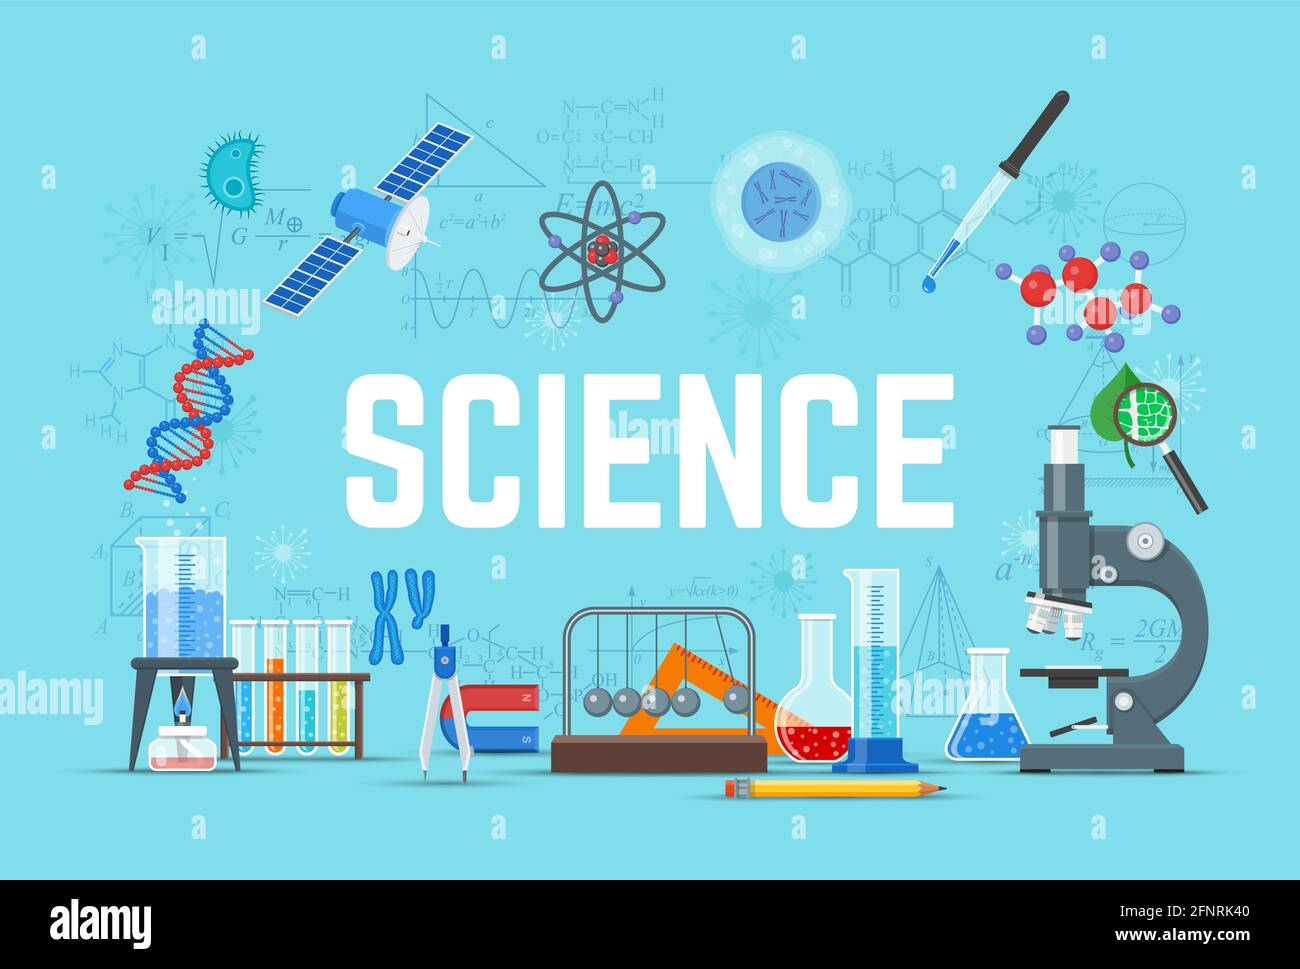 Science concept vector illustration, flat style design Stock Vector